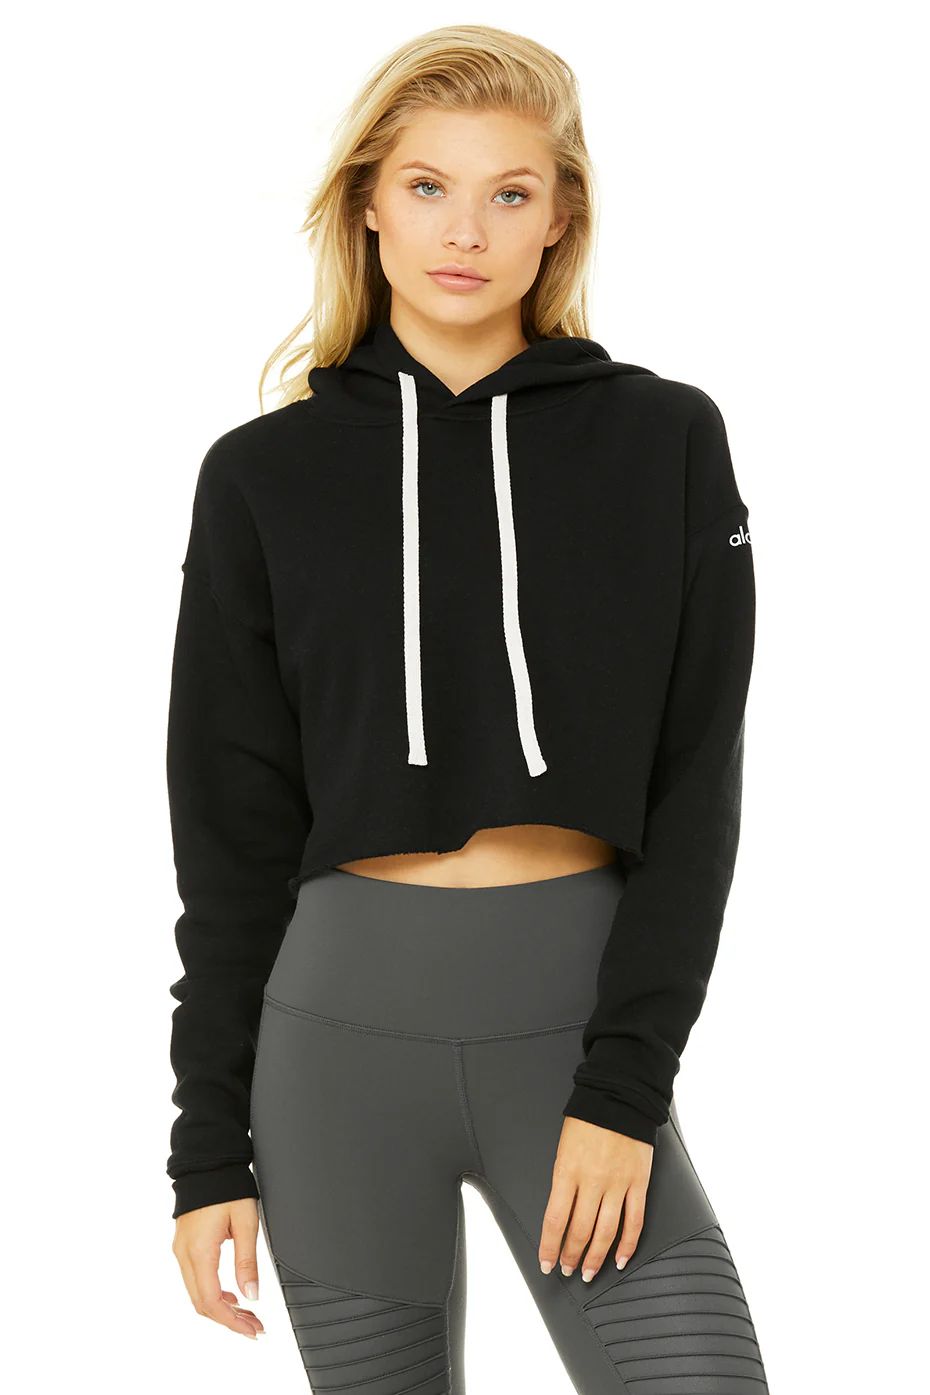 Limited-Edition Exclusive Cropped Hoodie | Alo Yoga